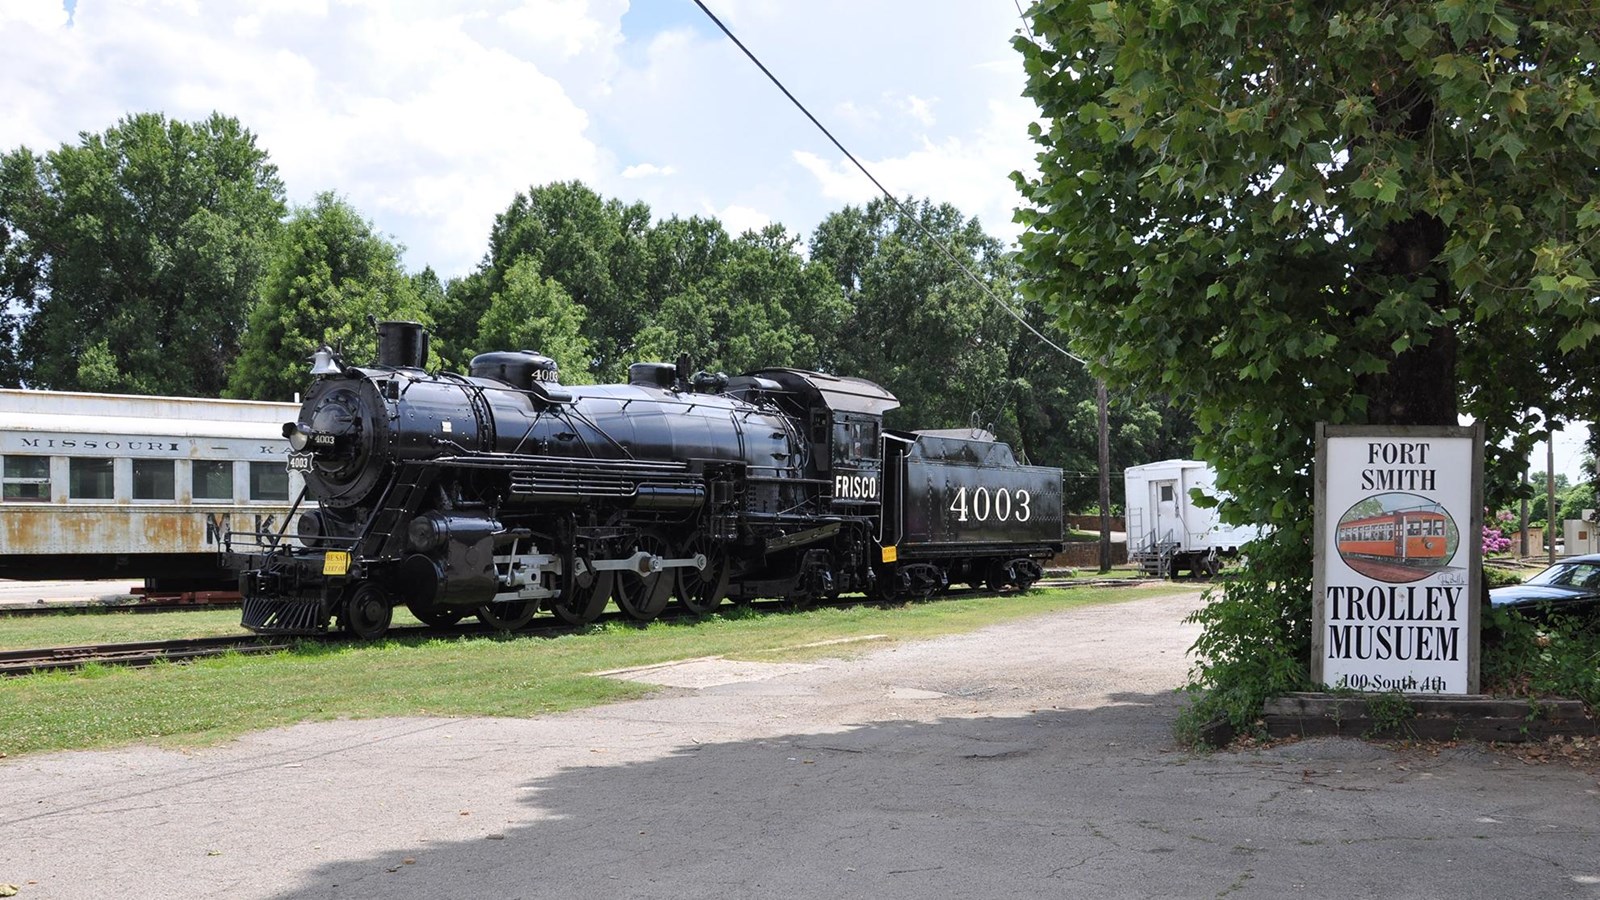 Fort Smith Trolley Museum Ar